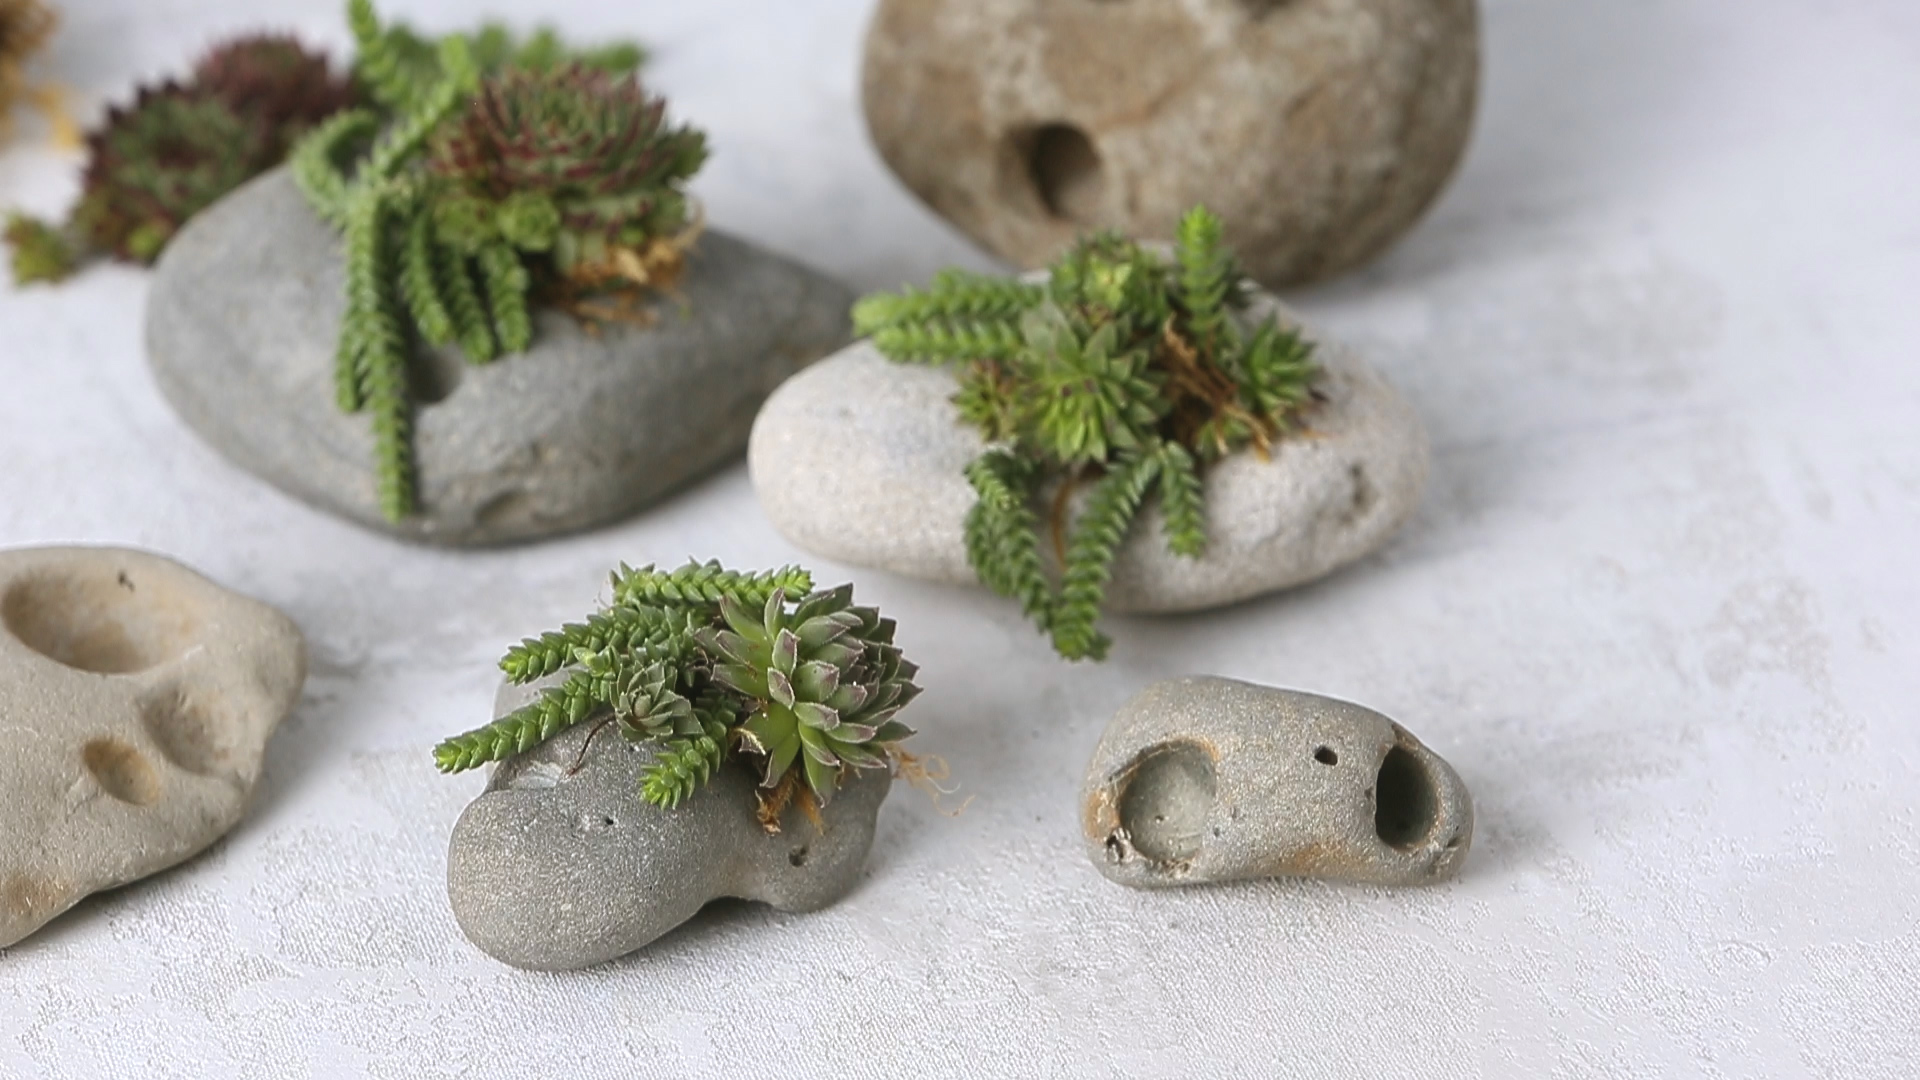 How to Make Succulent Rocks